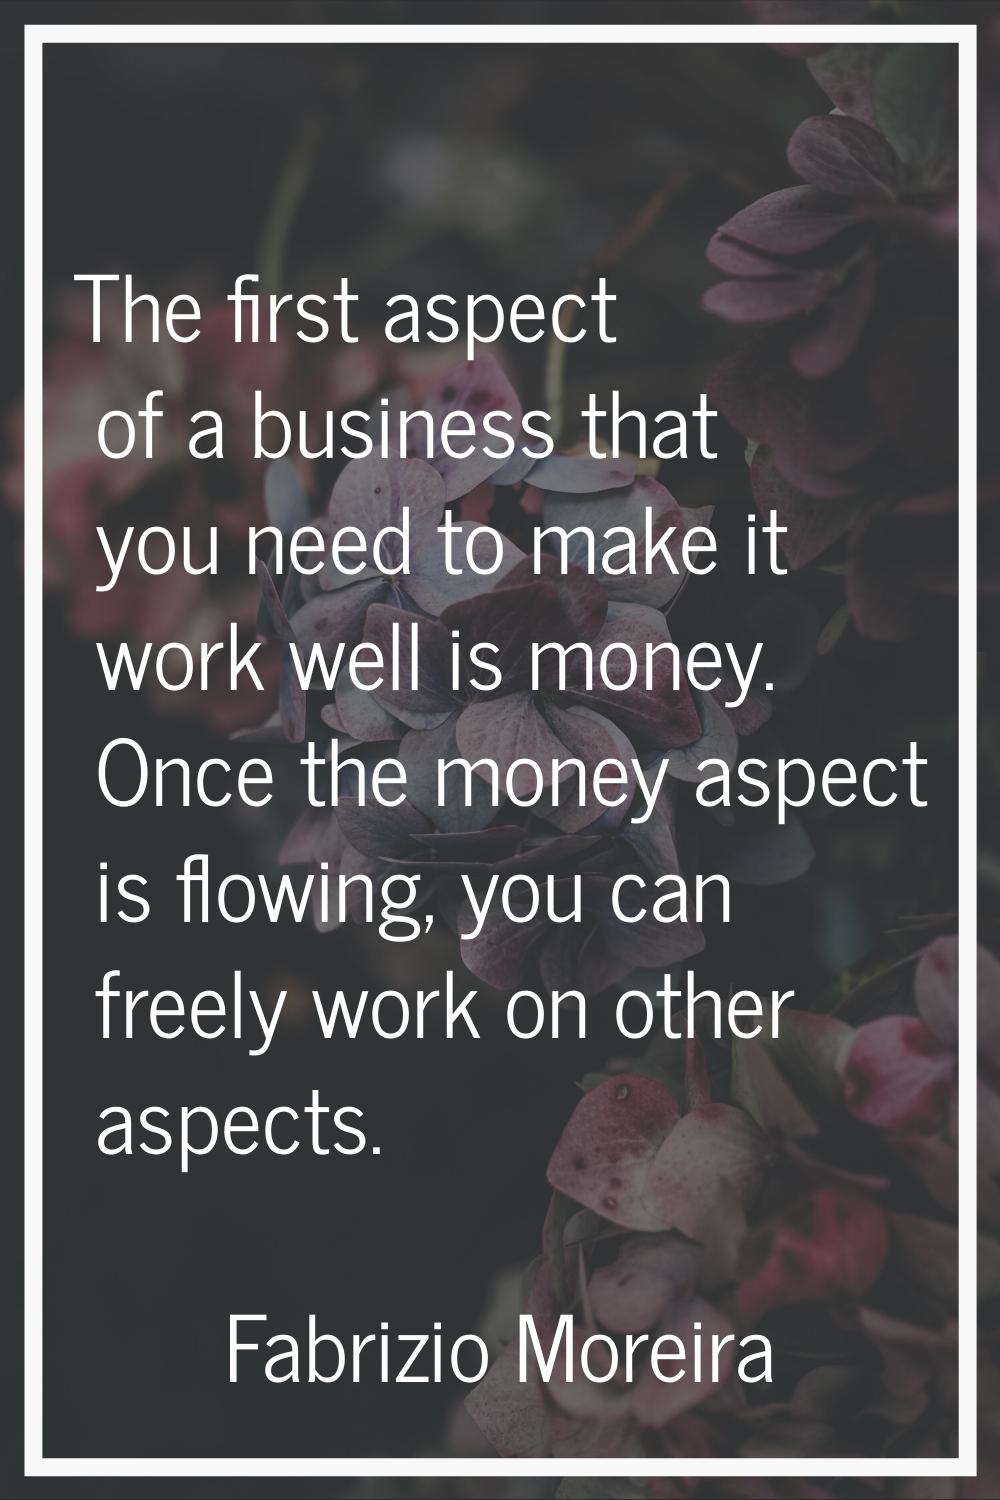 The first aspect of a business that you need to make it work well is money. Once the money aspect i